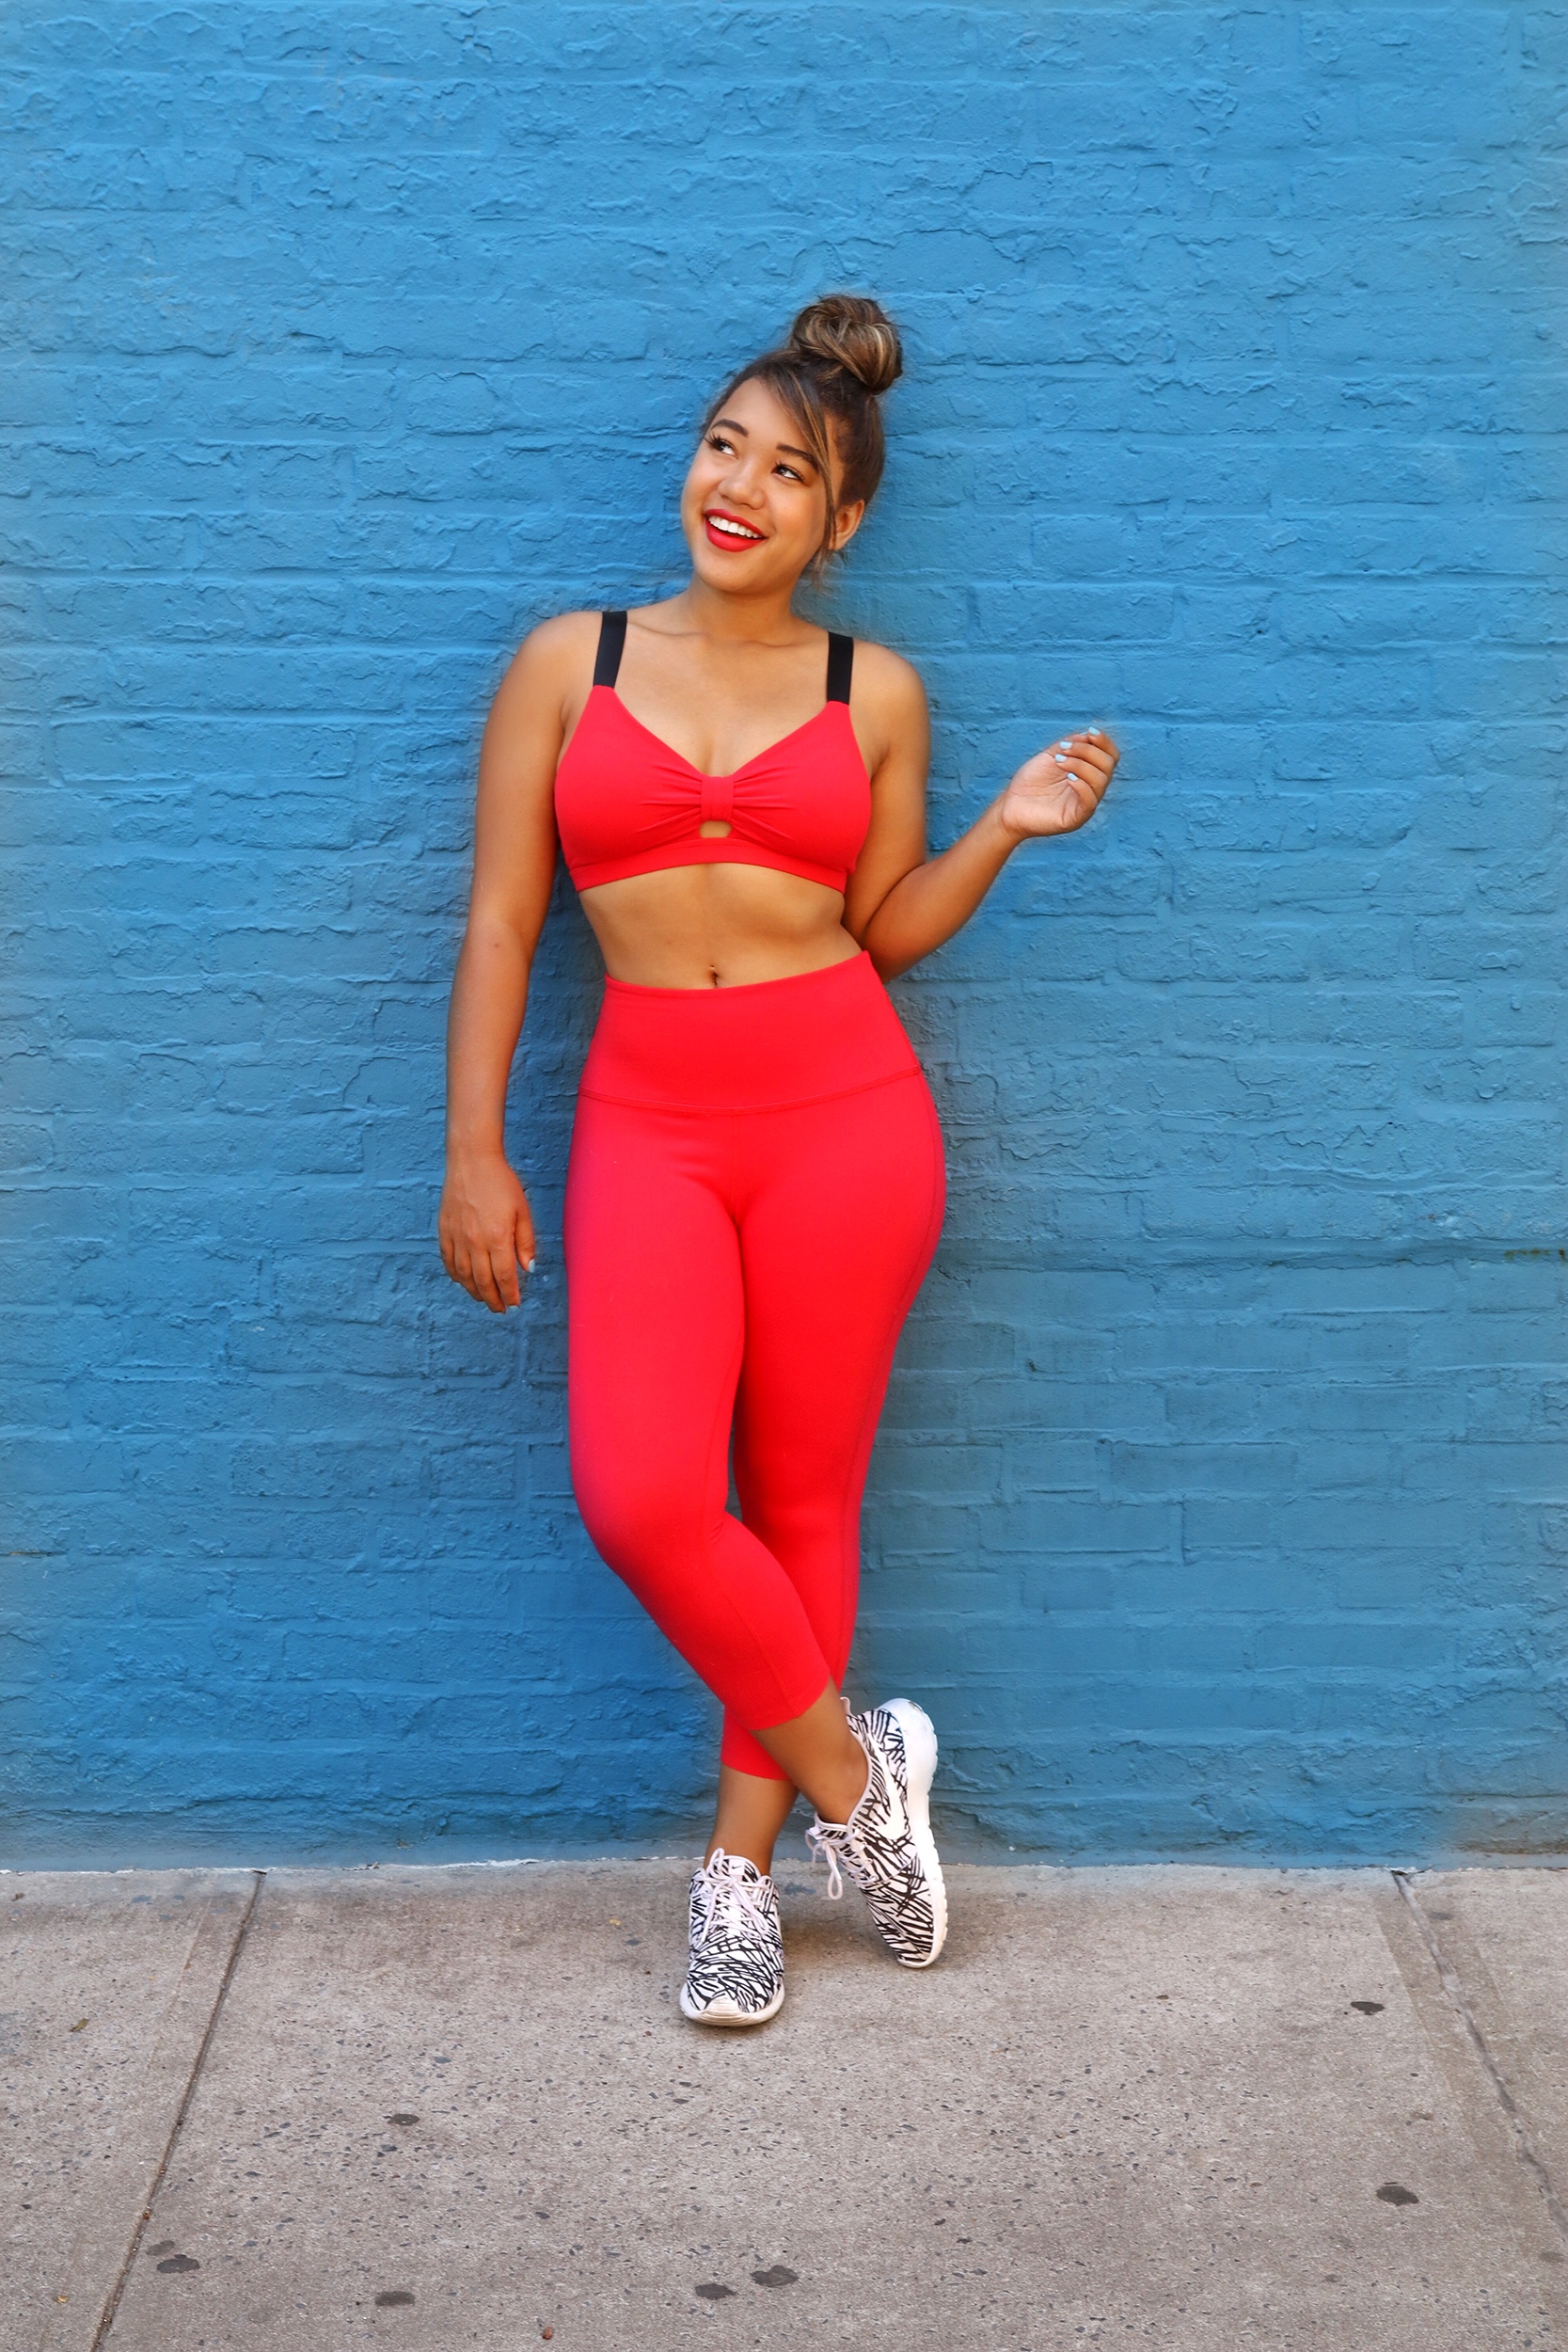 Work Out Style! pants: http://bit.ly/28YAqpD sports bra: http://bit.ly/292Ht25 bottle: http://bit.ly/295A2rz nikes: http://bit.ly/295AnMw